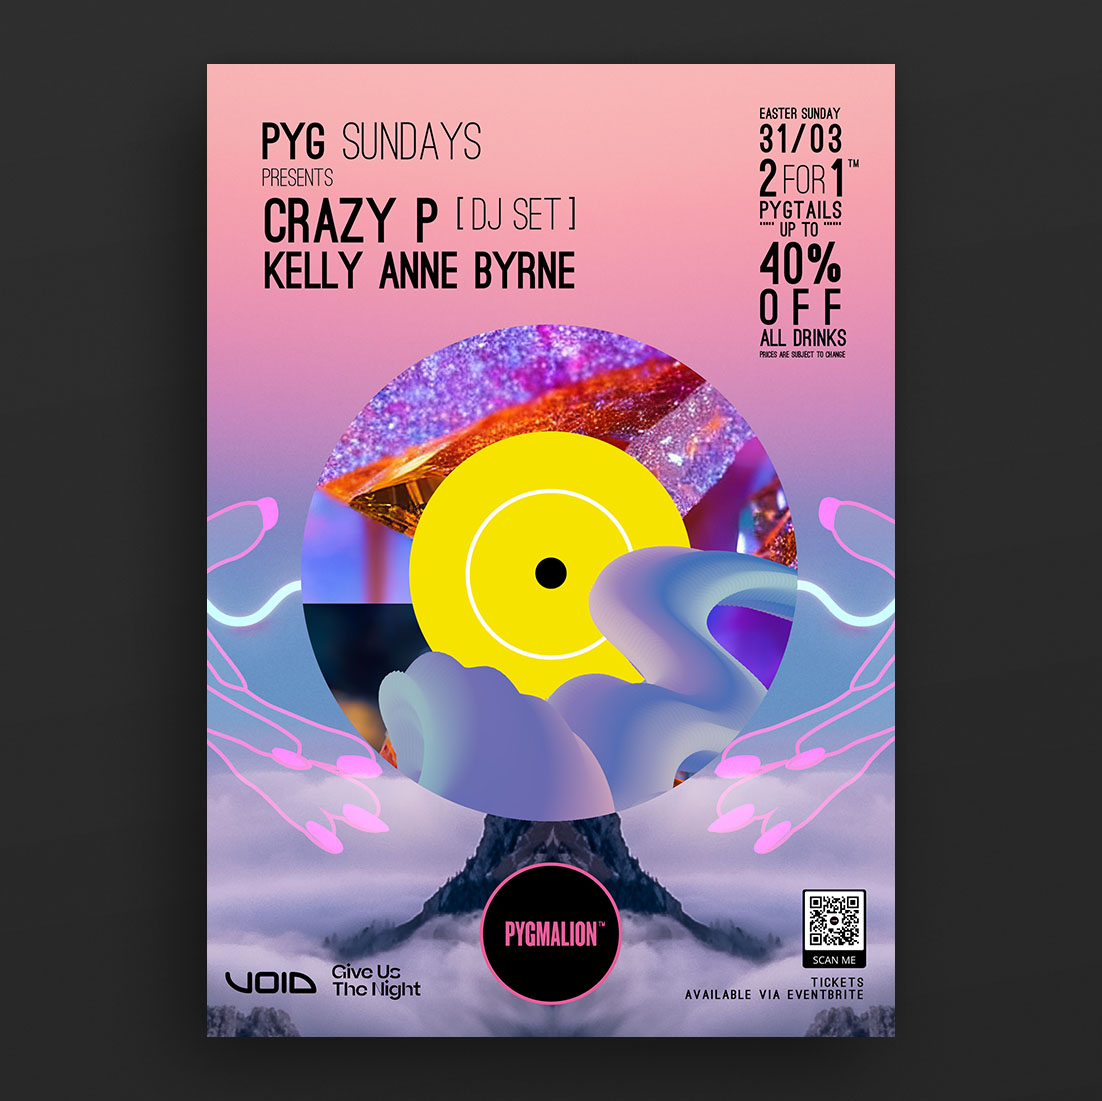 This Sunday we're joined by Crazy P alongside @KellyAnneByrne2 and final tickets are available now ra.co/events/1860643